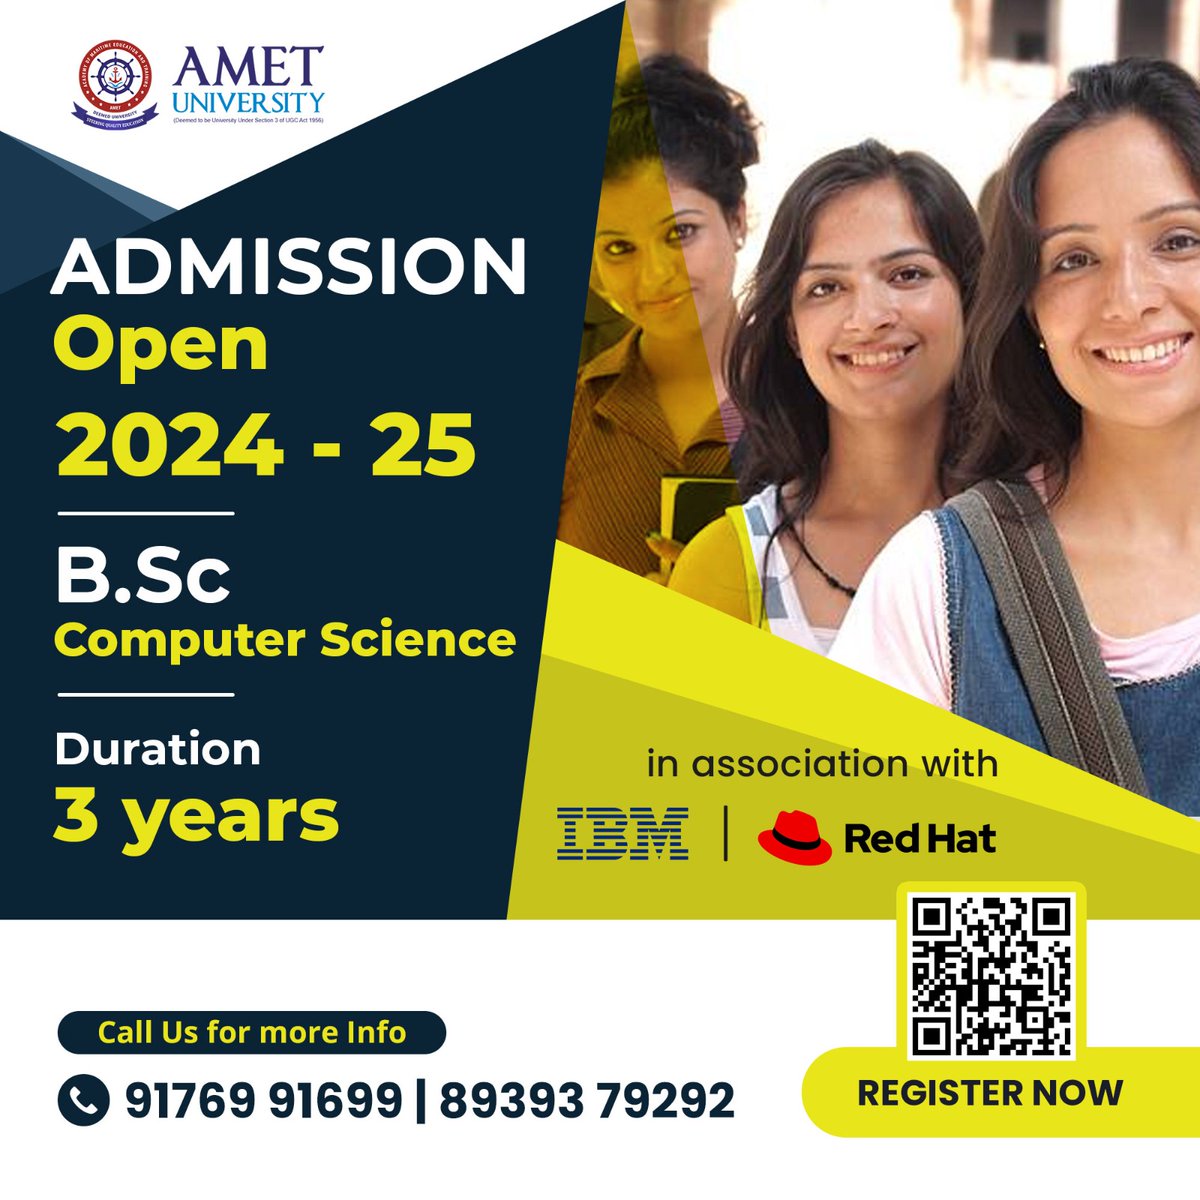 Admission Open 2024 - 25
B.Sc Computer Science
Duration: 3 years

For more details,
Visit: ametuniv.ac.in

#ComputerScience #Technology #Innovation #BSc #UGProgram #AmetUniversity #Amet #Chennai #ECR